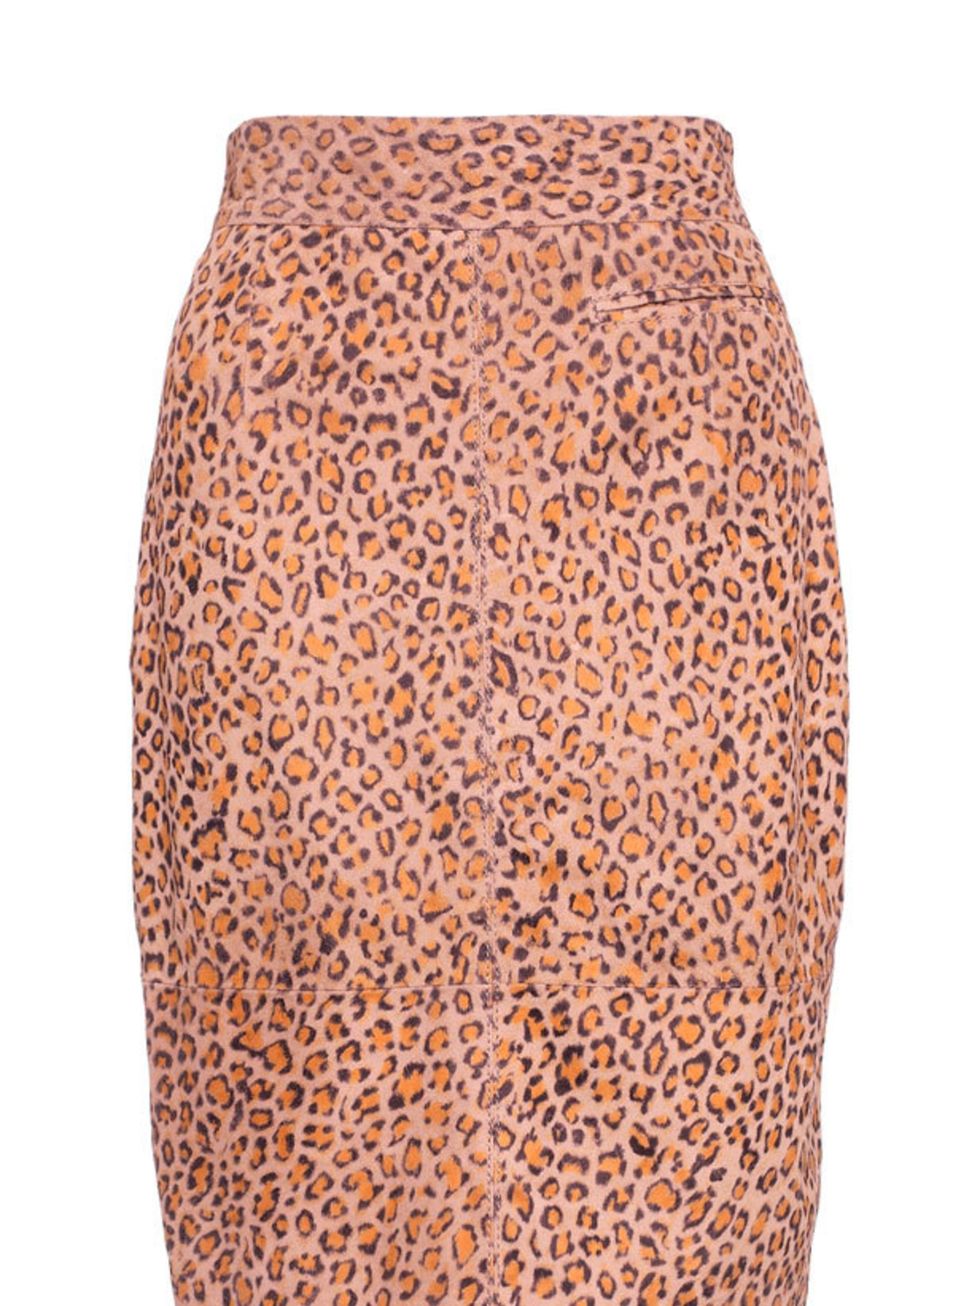 <p><a href="http://www.whistles.co.uk/fcp/categorylist/dept/shop?resetFilters=true">Whistles</a> leopard print pencil skirt, £225</p>